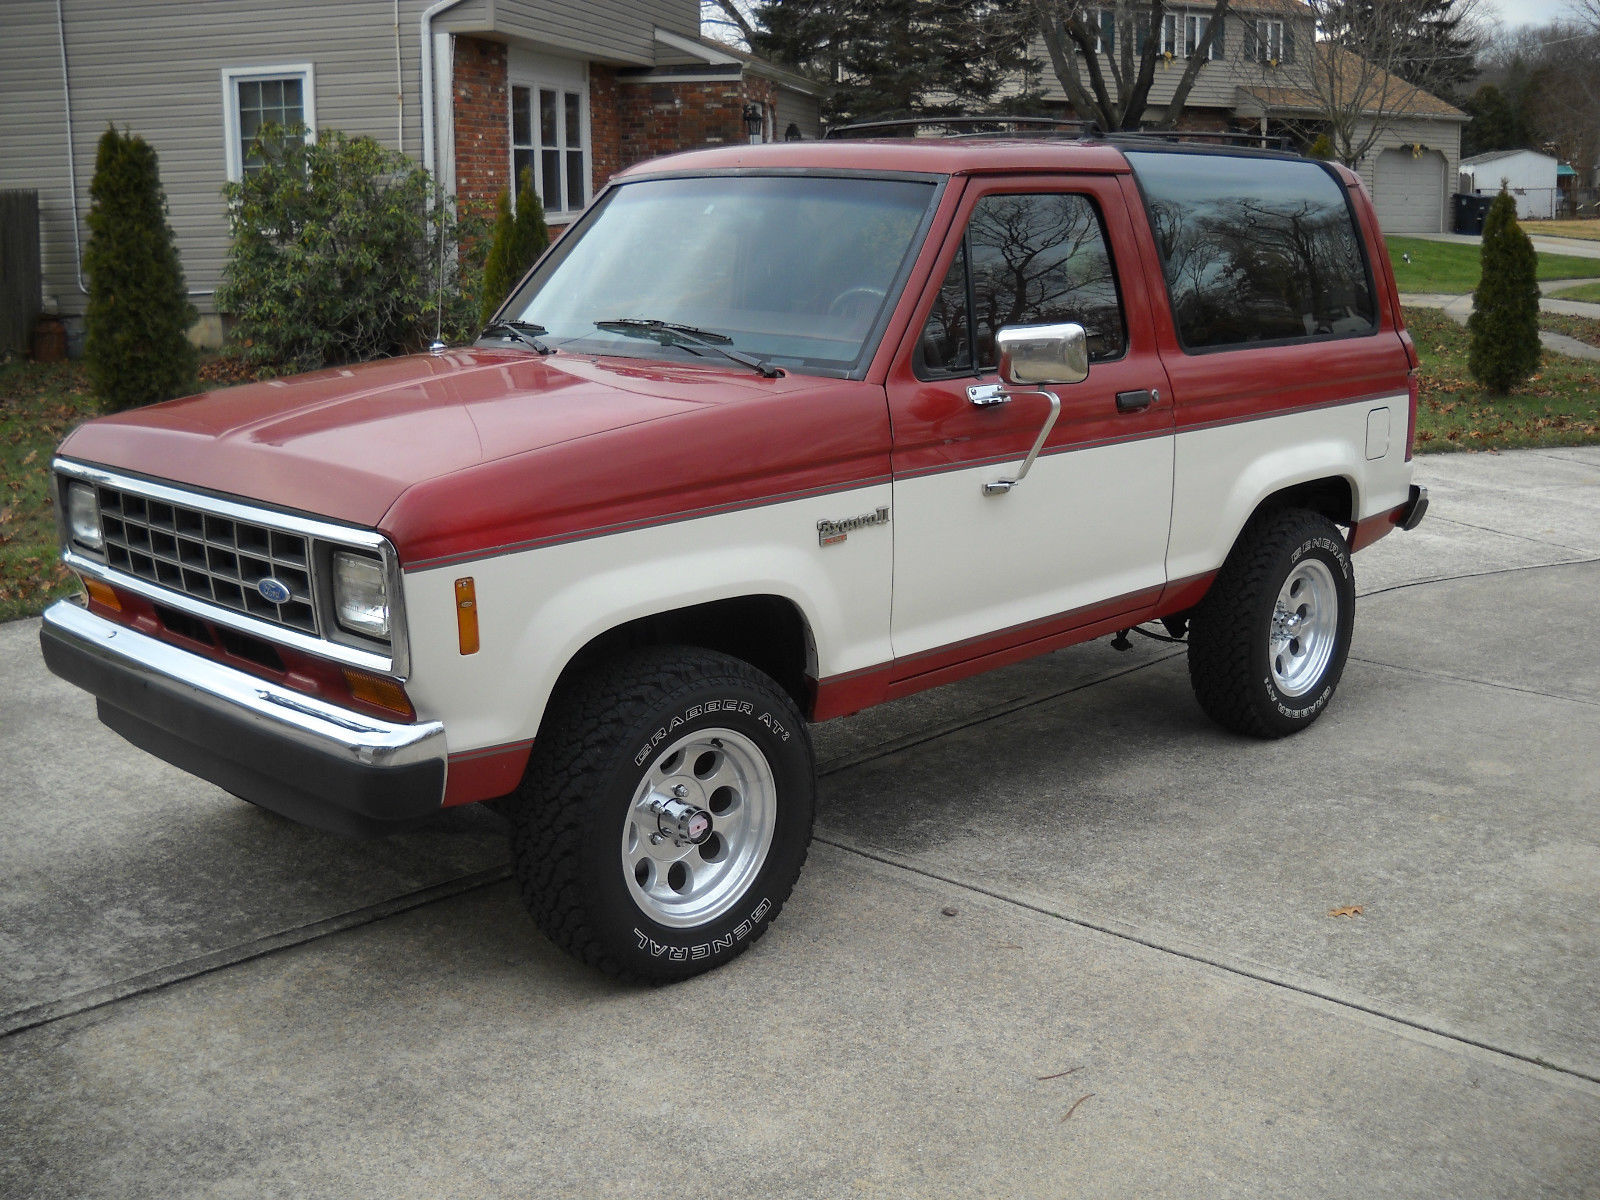 1987 Ford Bronco Ii Xlt Mint Condition For Sale In